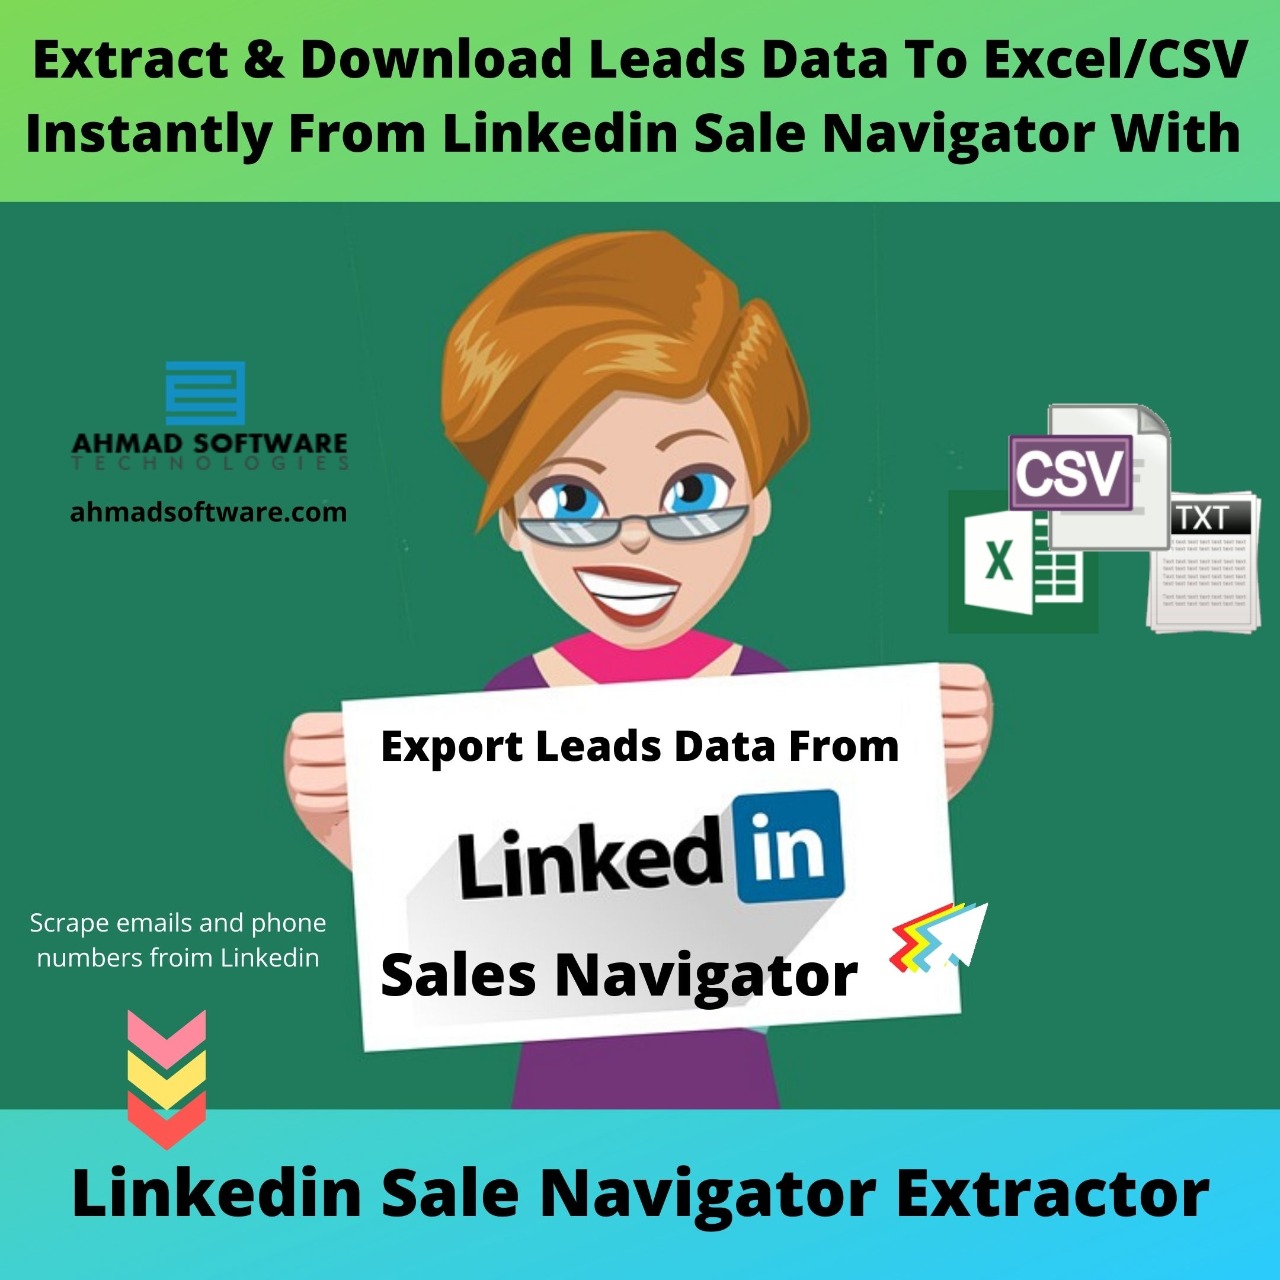 Download Data To Excel/CSV Instantly With Linkedin Sale Navigator Extractor